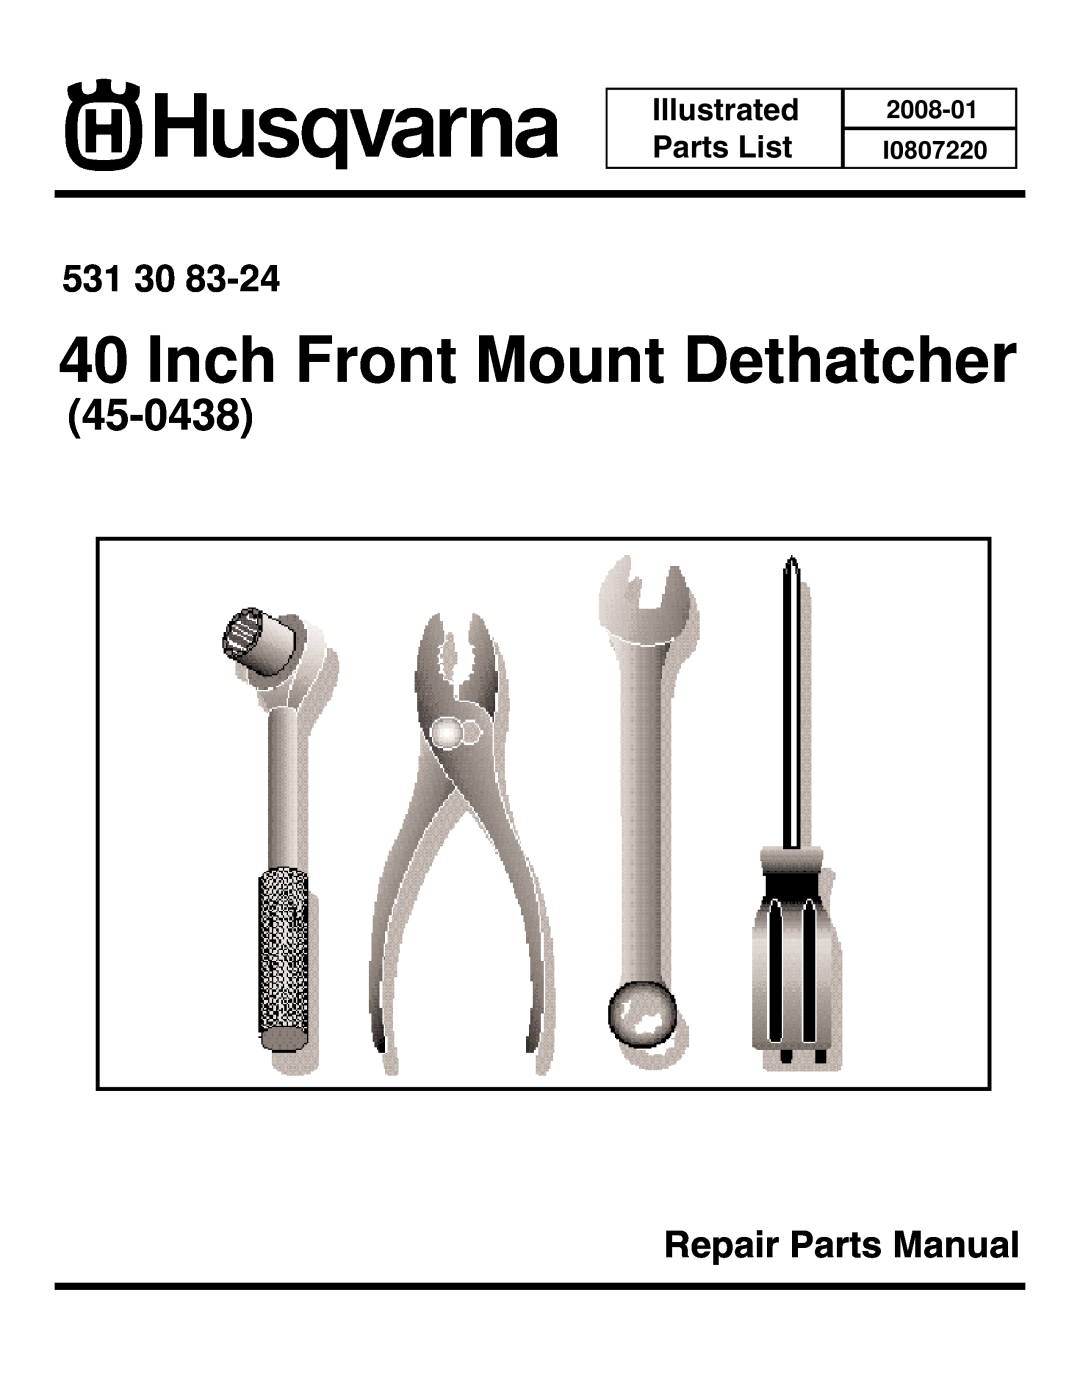 Agri-Fab 45-0438 manual Inch Front Mount Dethatcher, 531 30, Repair Parts Manual, Illustrated Parts List, 2008-01 I0807220 